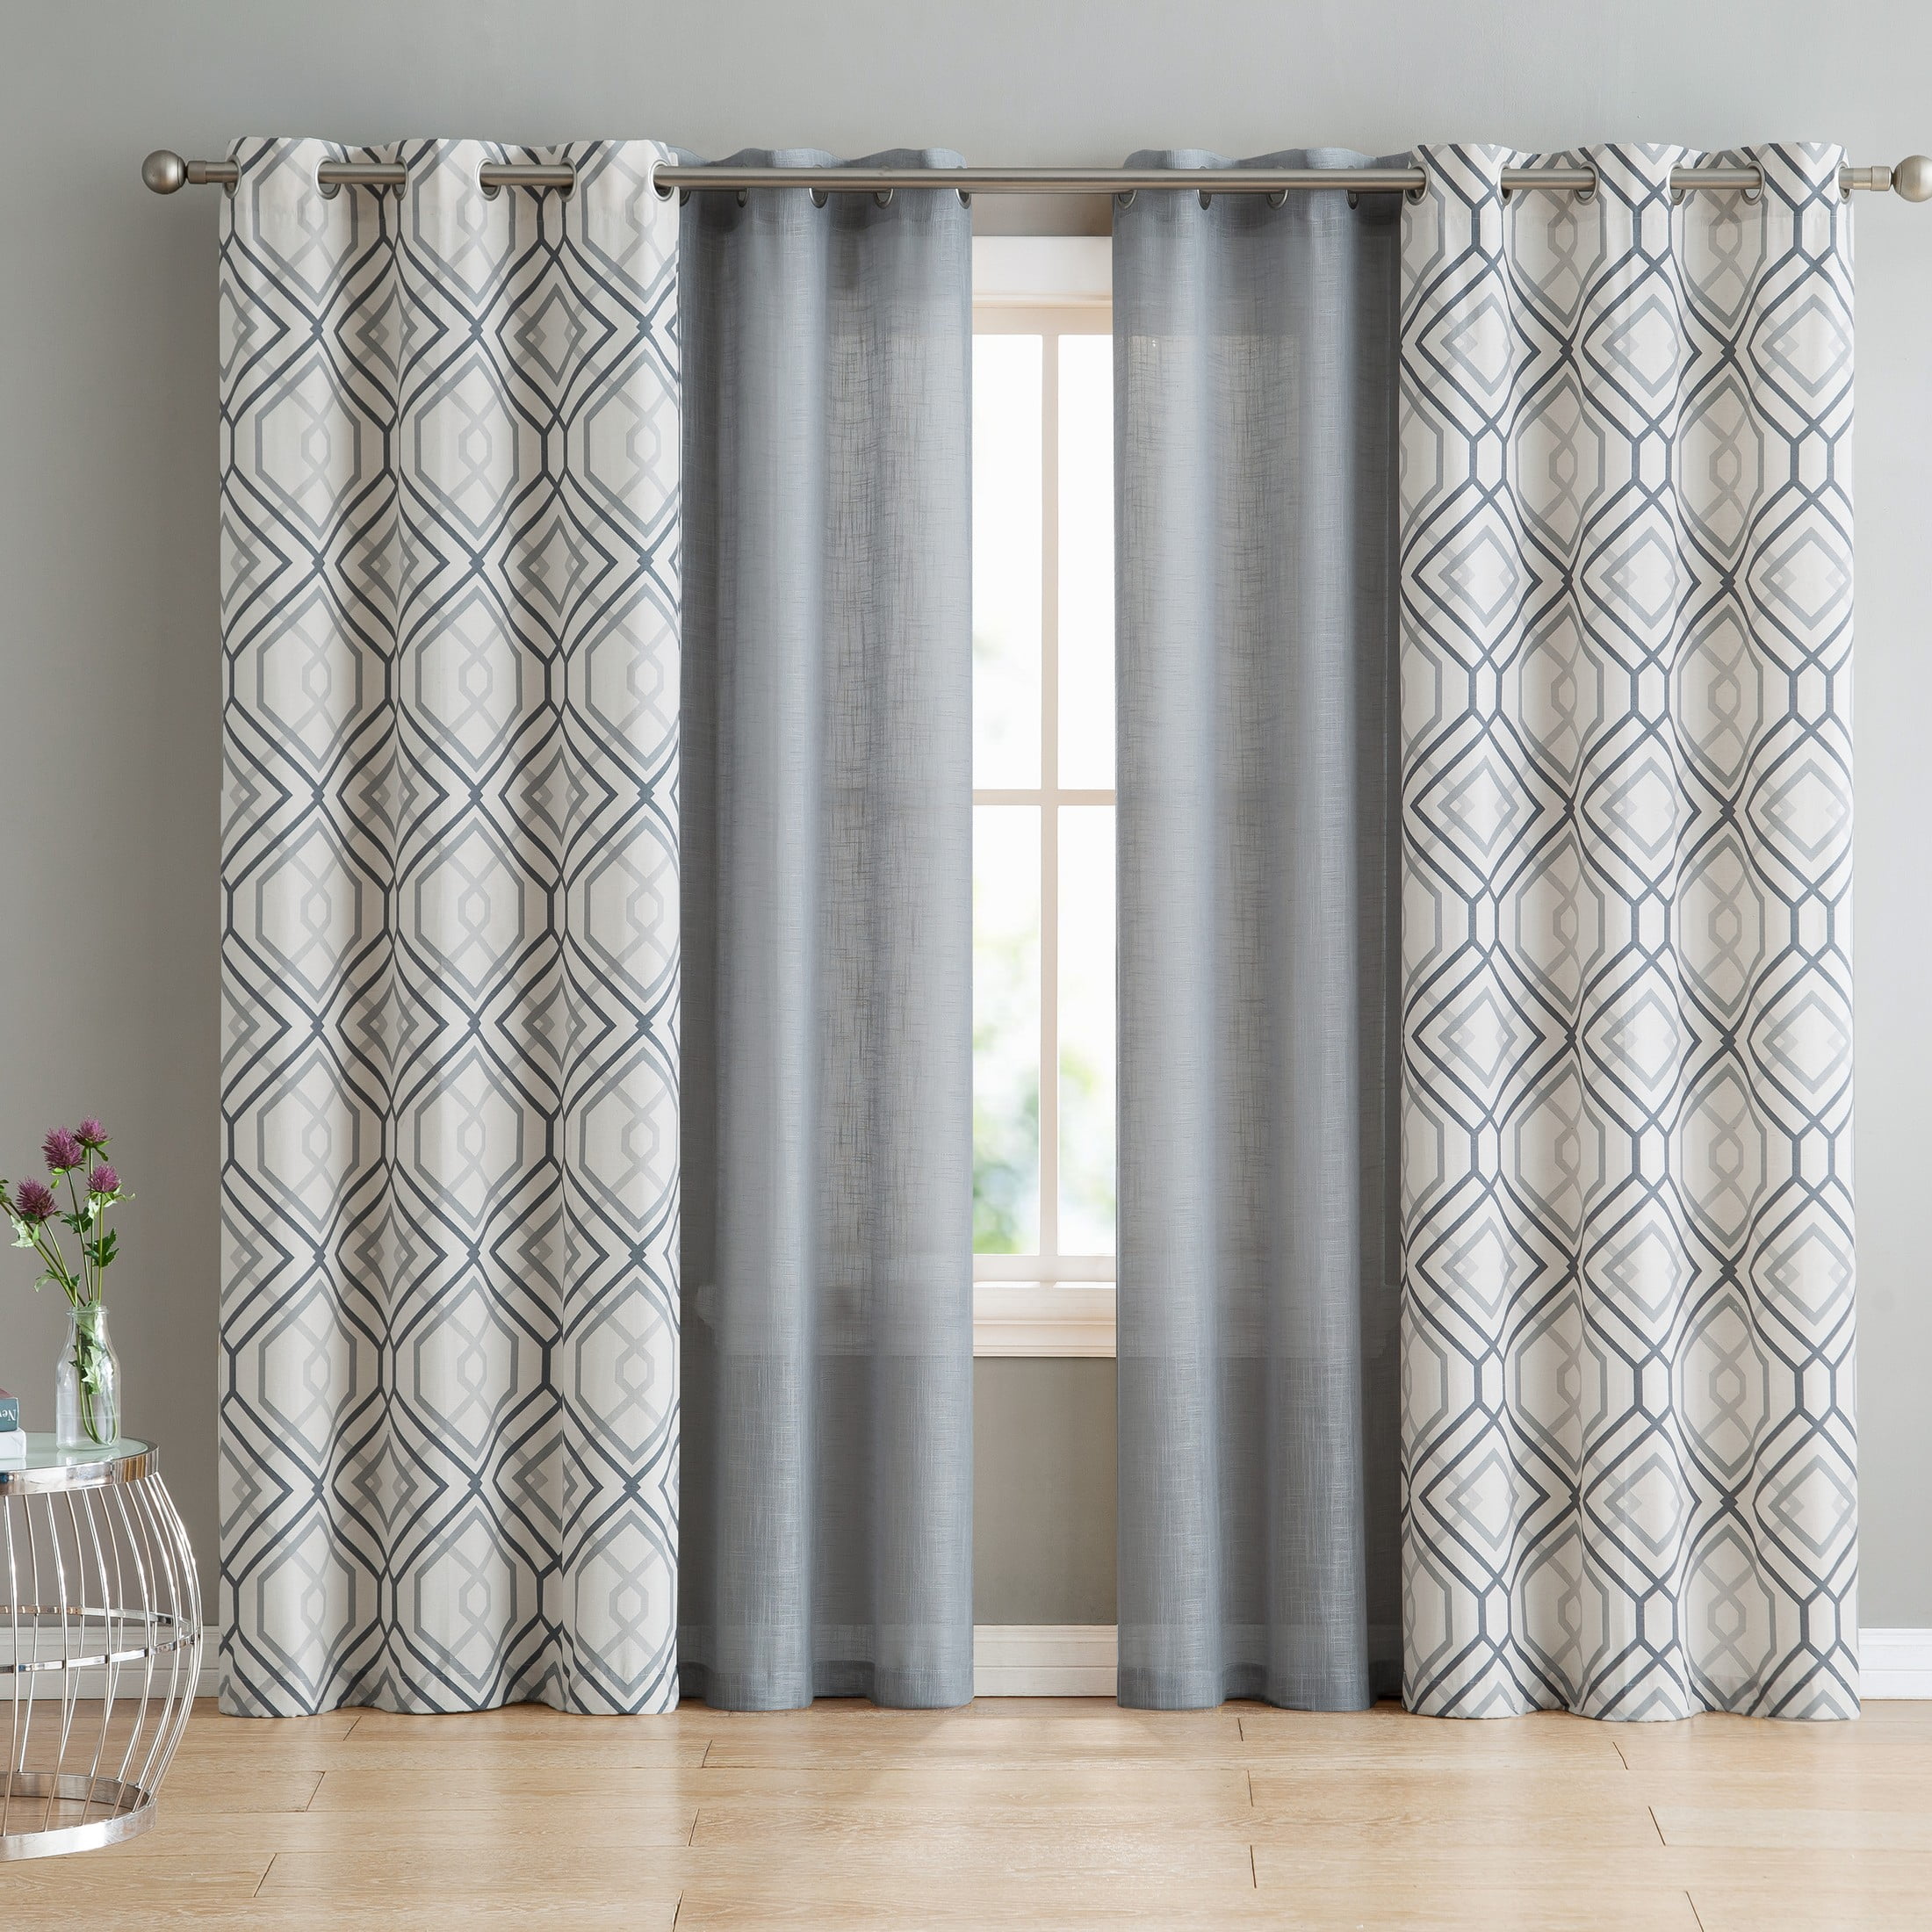 VCNY Home Jackston 4-Piece Charcoal Solid and Geometric Sheer Curtain ...